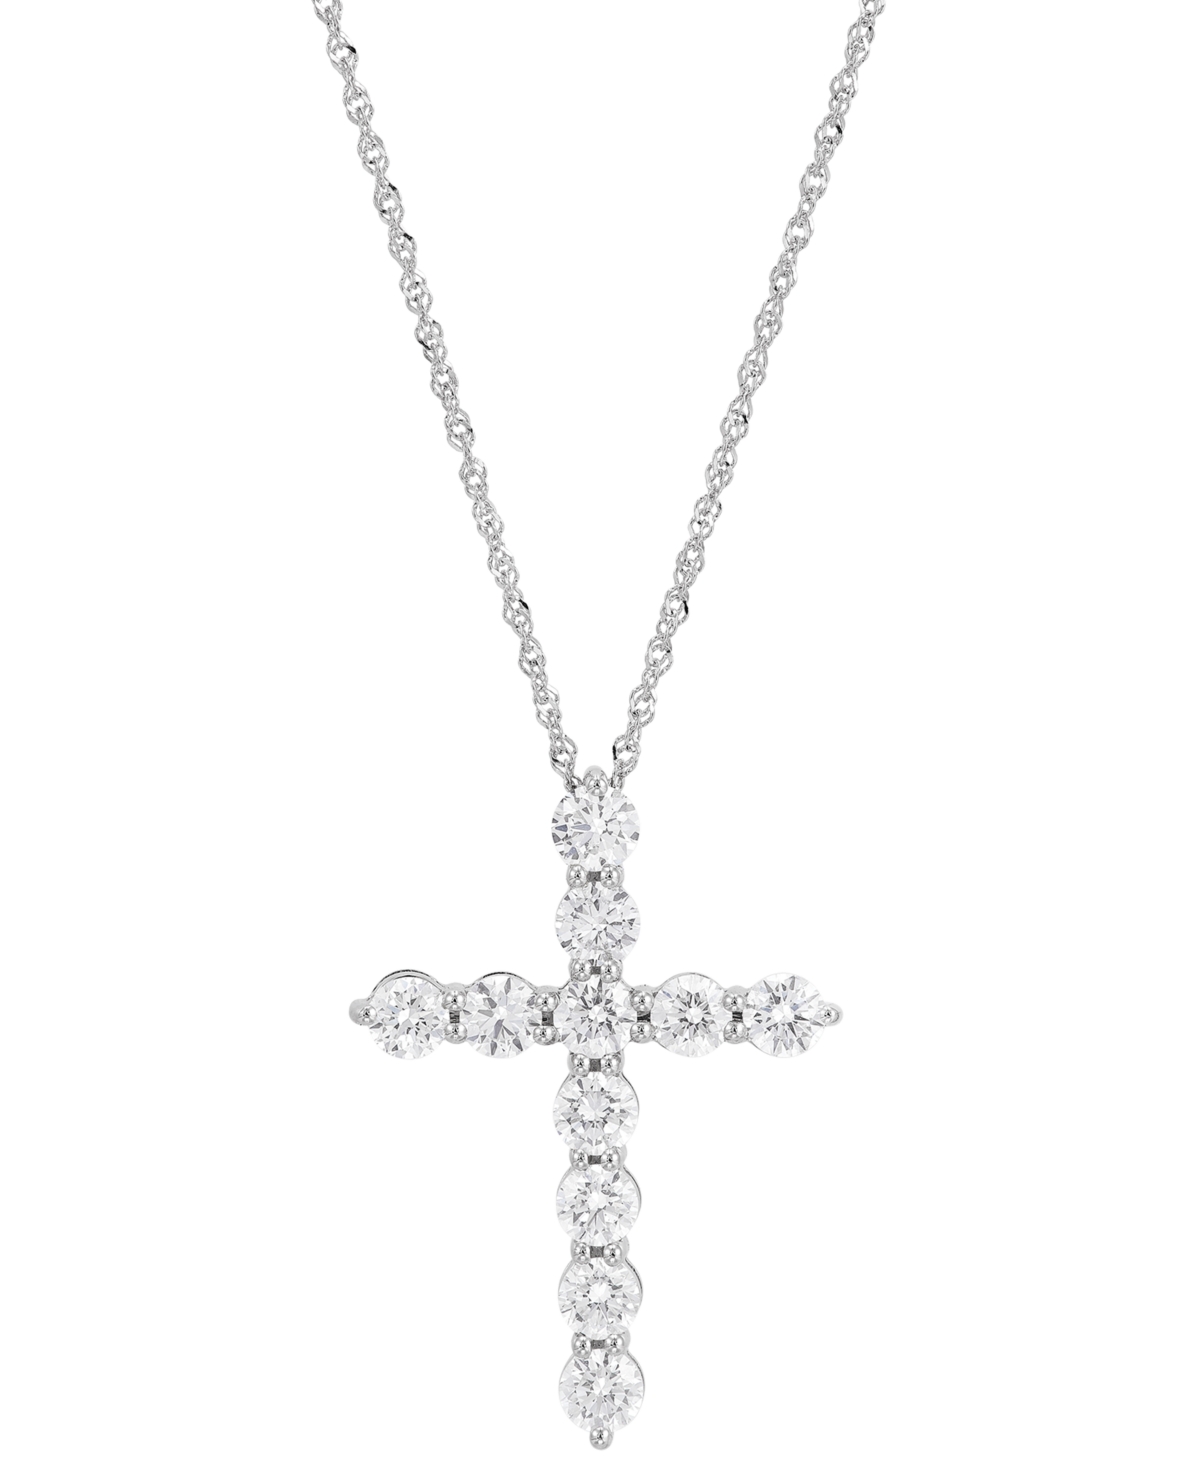 Grown With Love Lab Grown Diamond Cross Pendant Necklace (2 ct. t.w.) in 14k White Gold, 16" + 2" extender